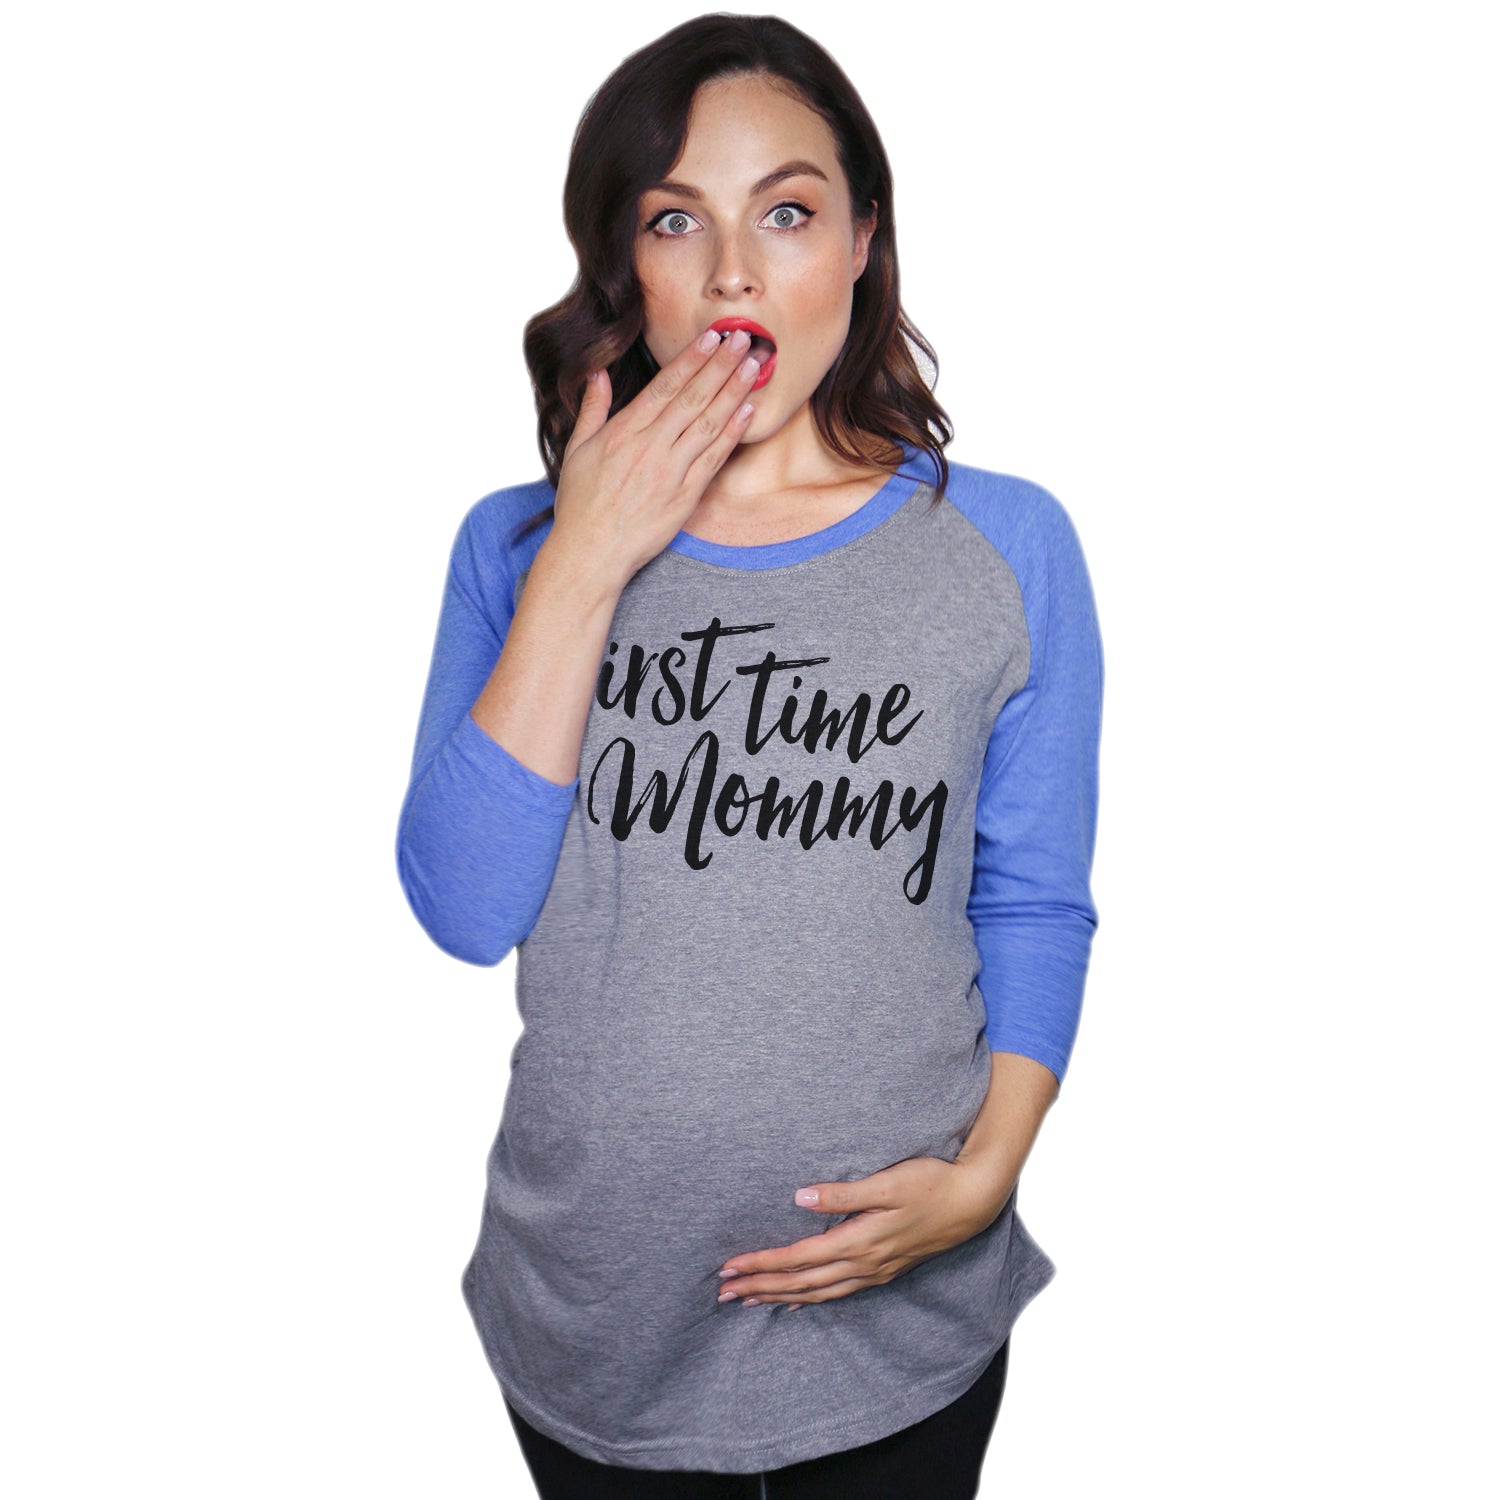 Funny Pink First Time Mommy raglan Nerdy Mother's Day Tee